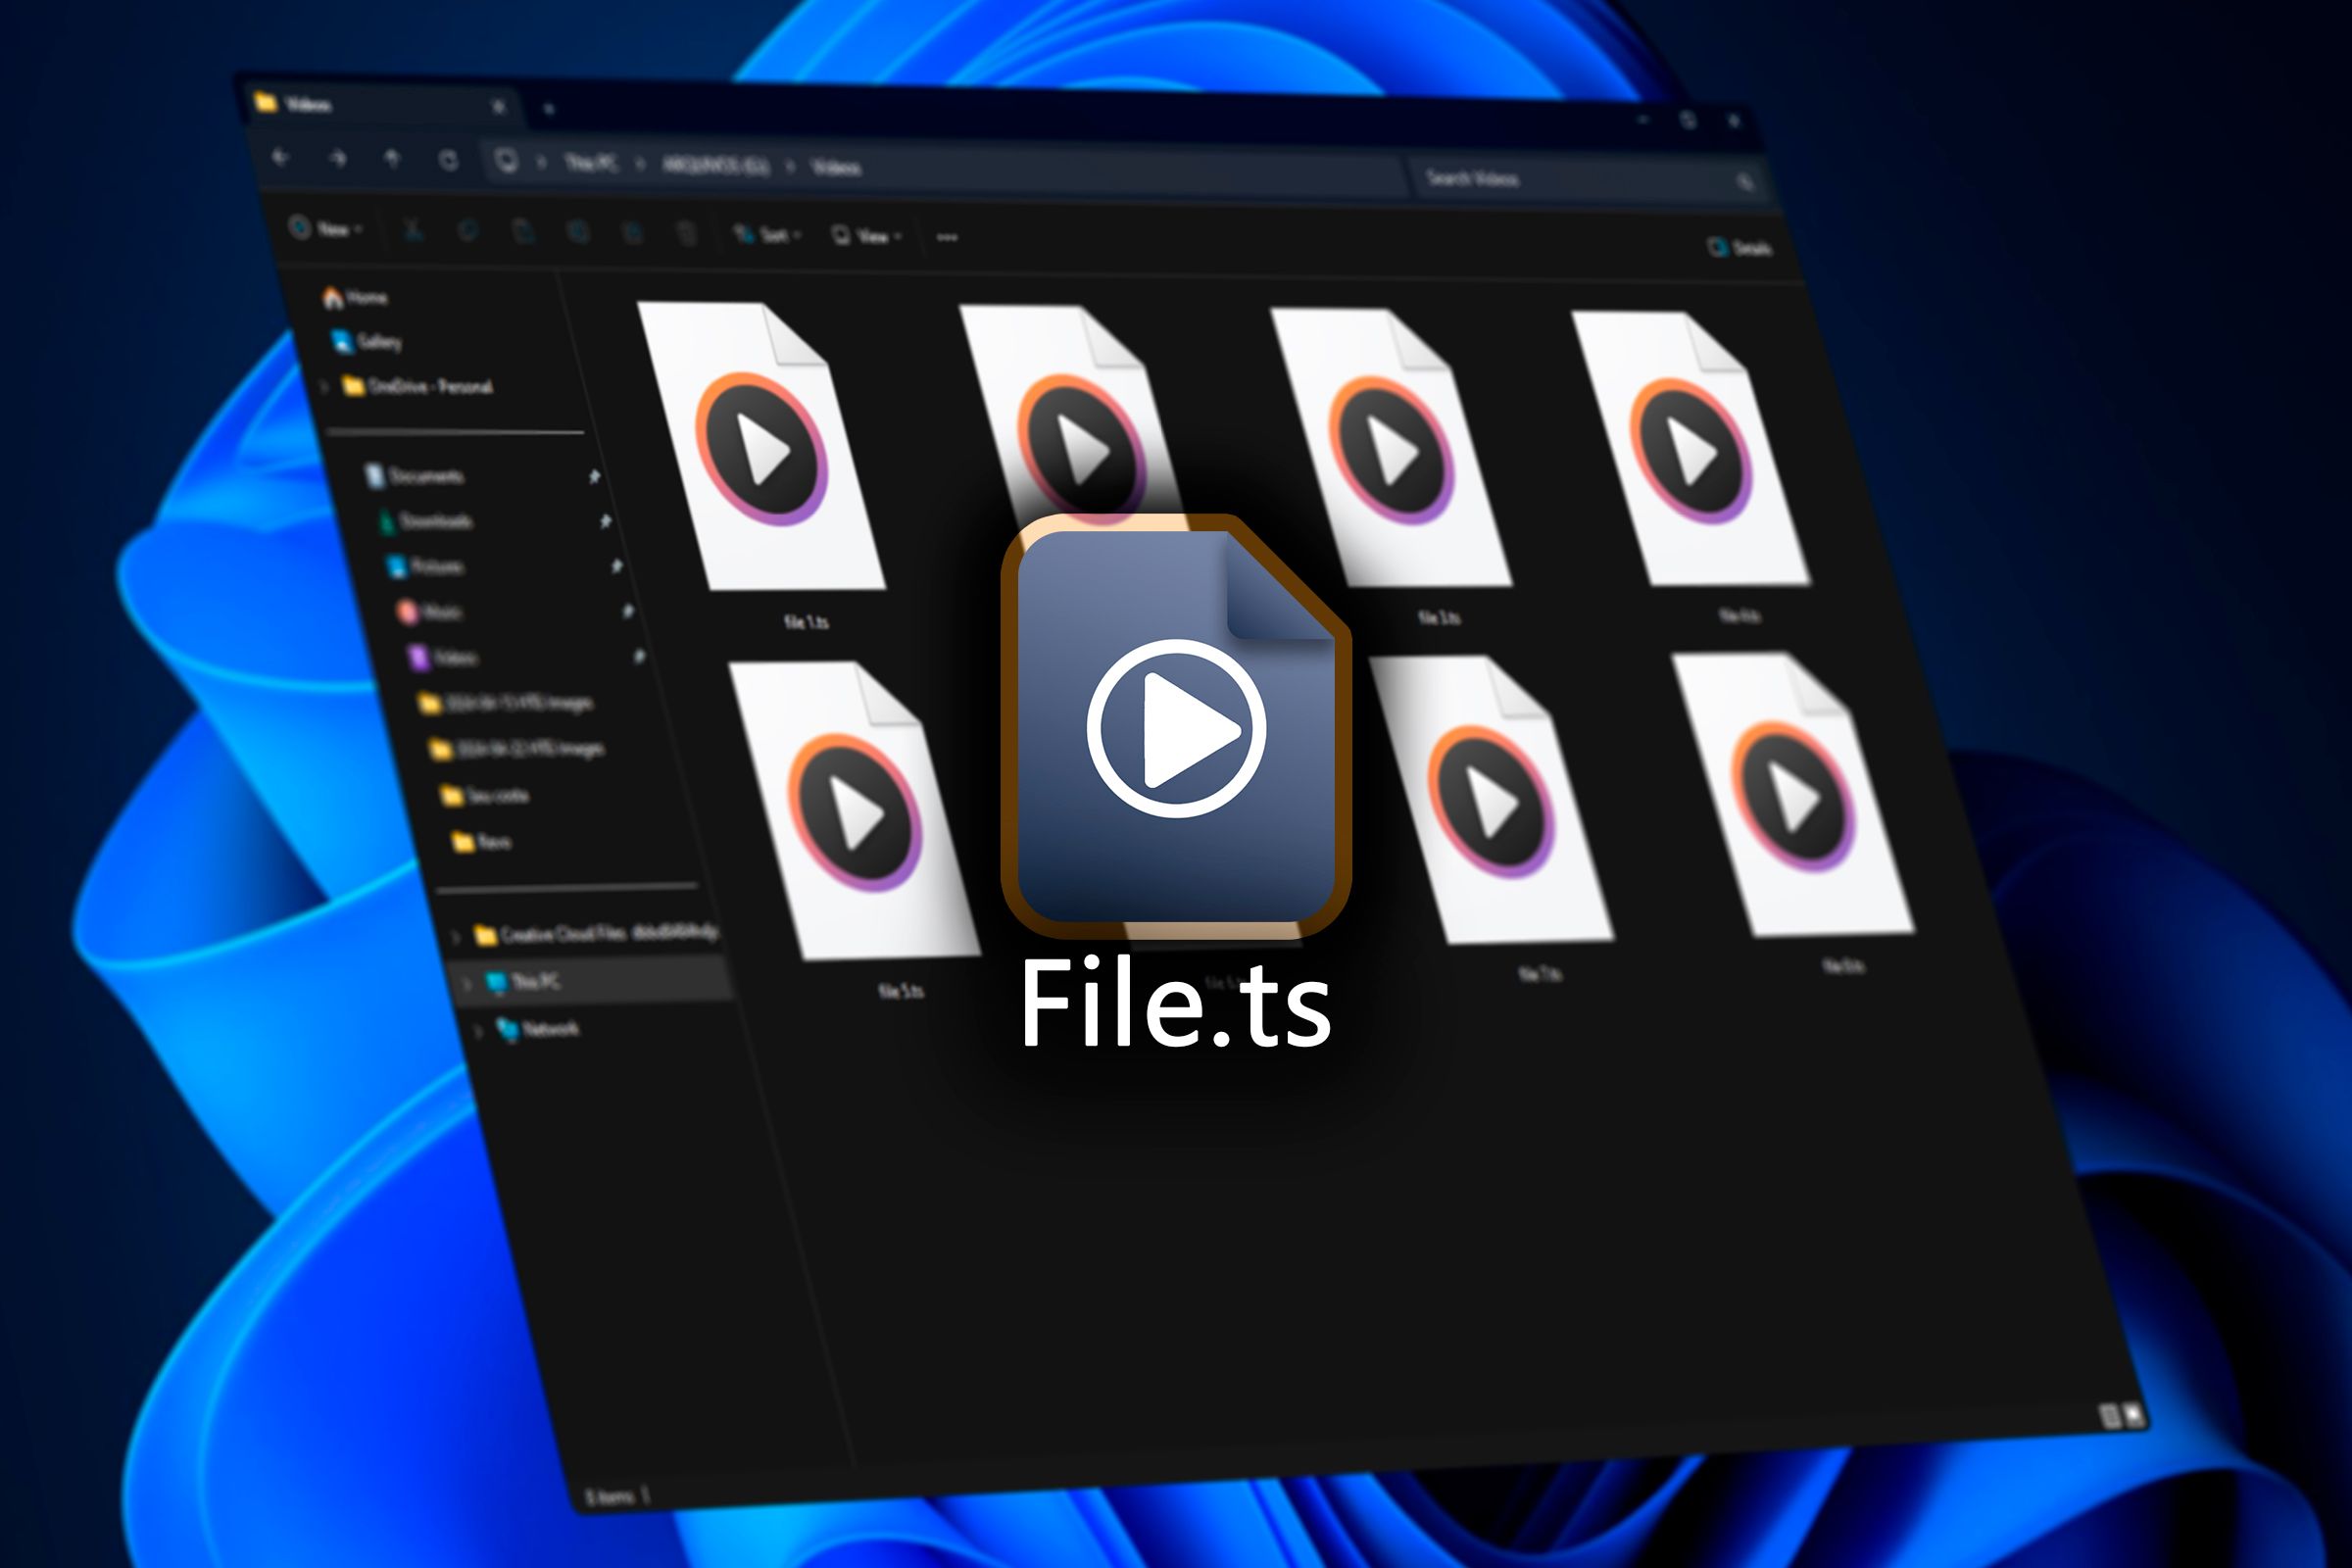 An illustration of a .ts file in the center of the screen, with the Windows File Explorer in the background displaying multiple video files.